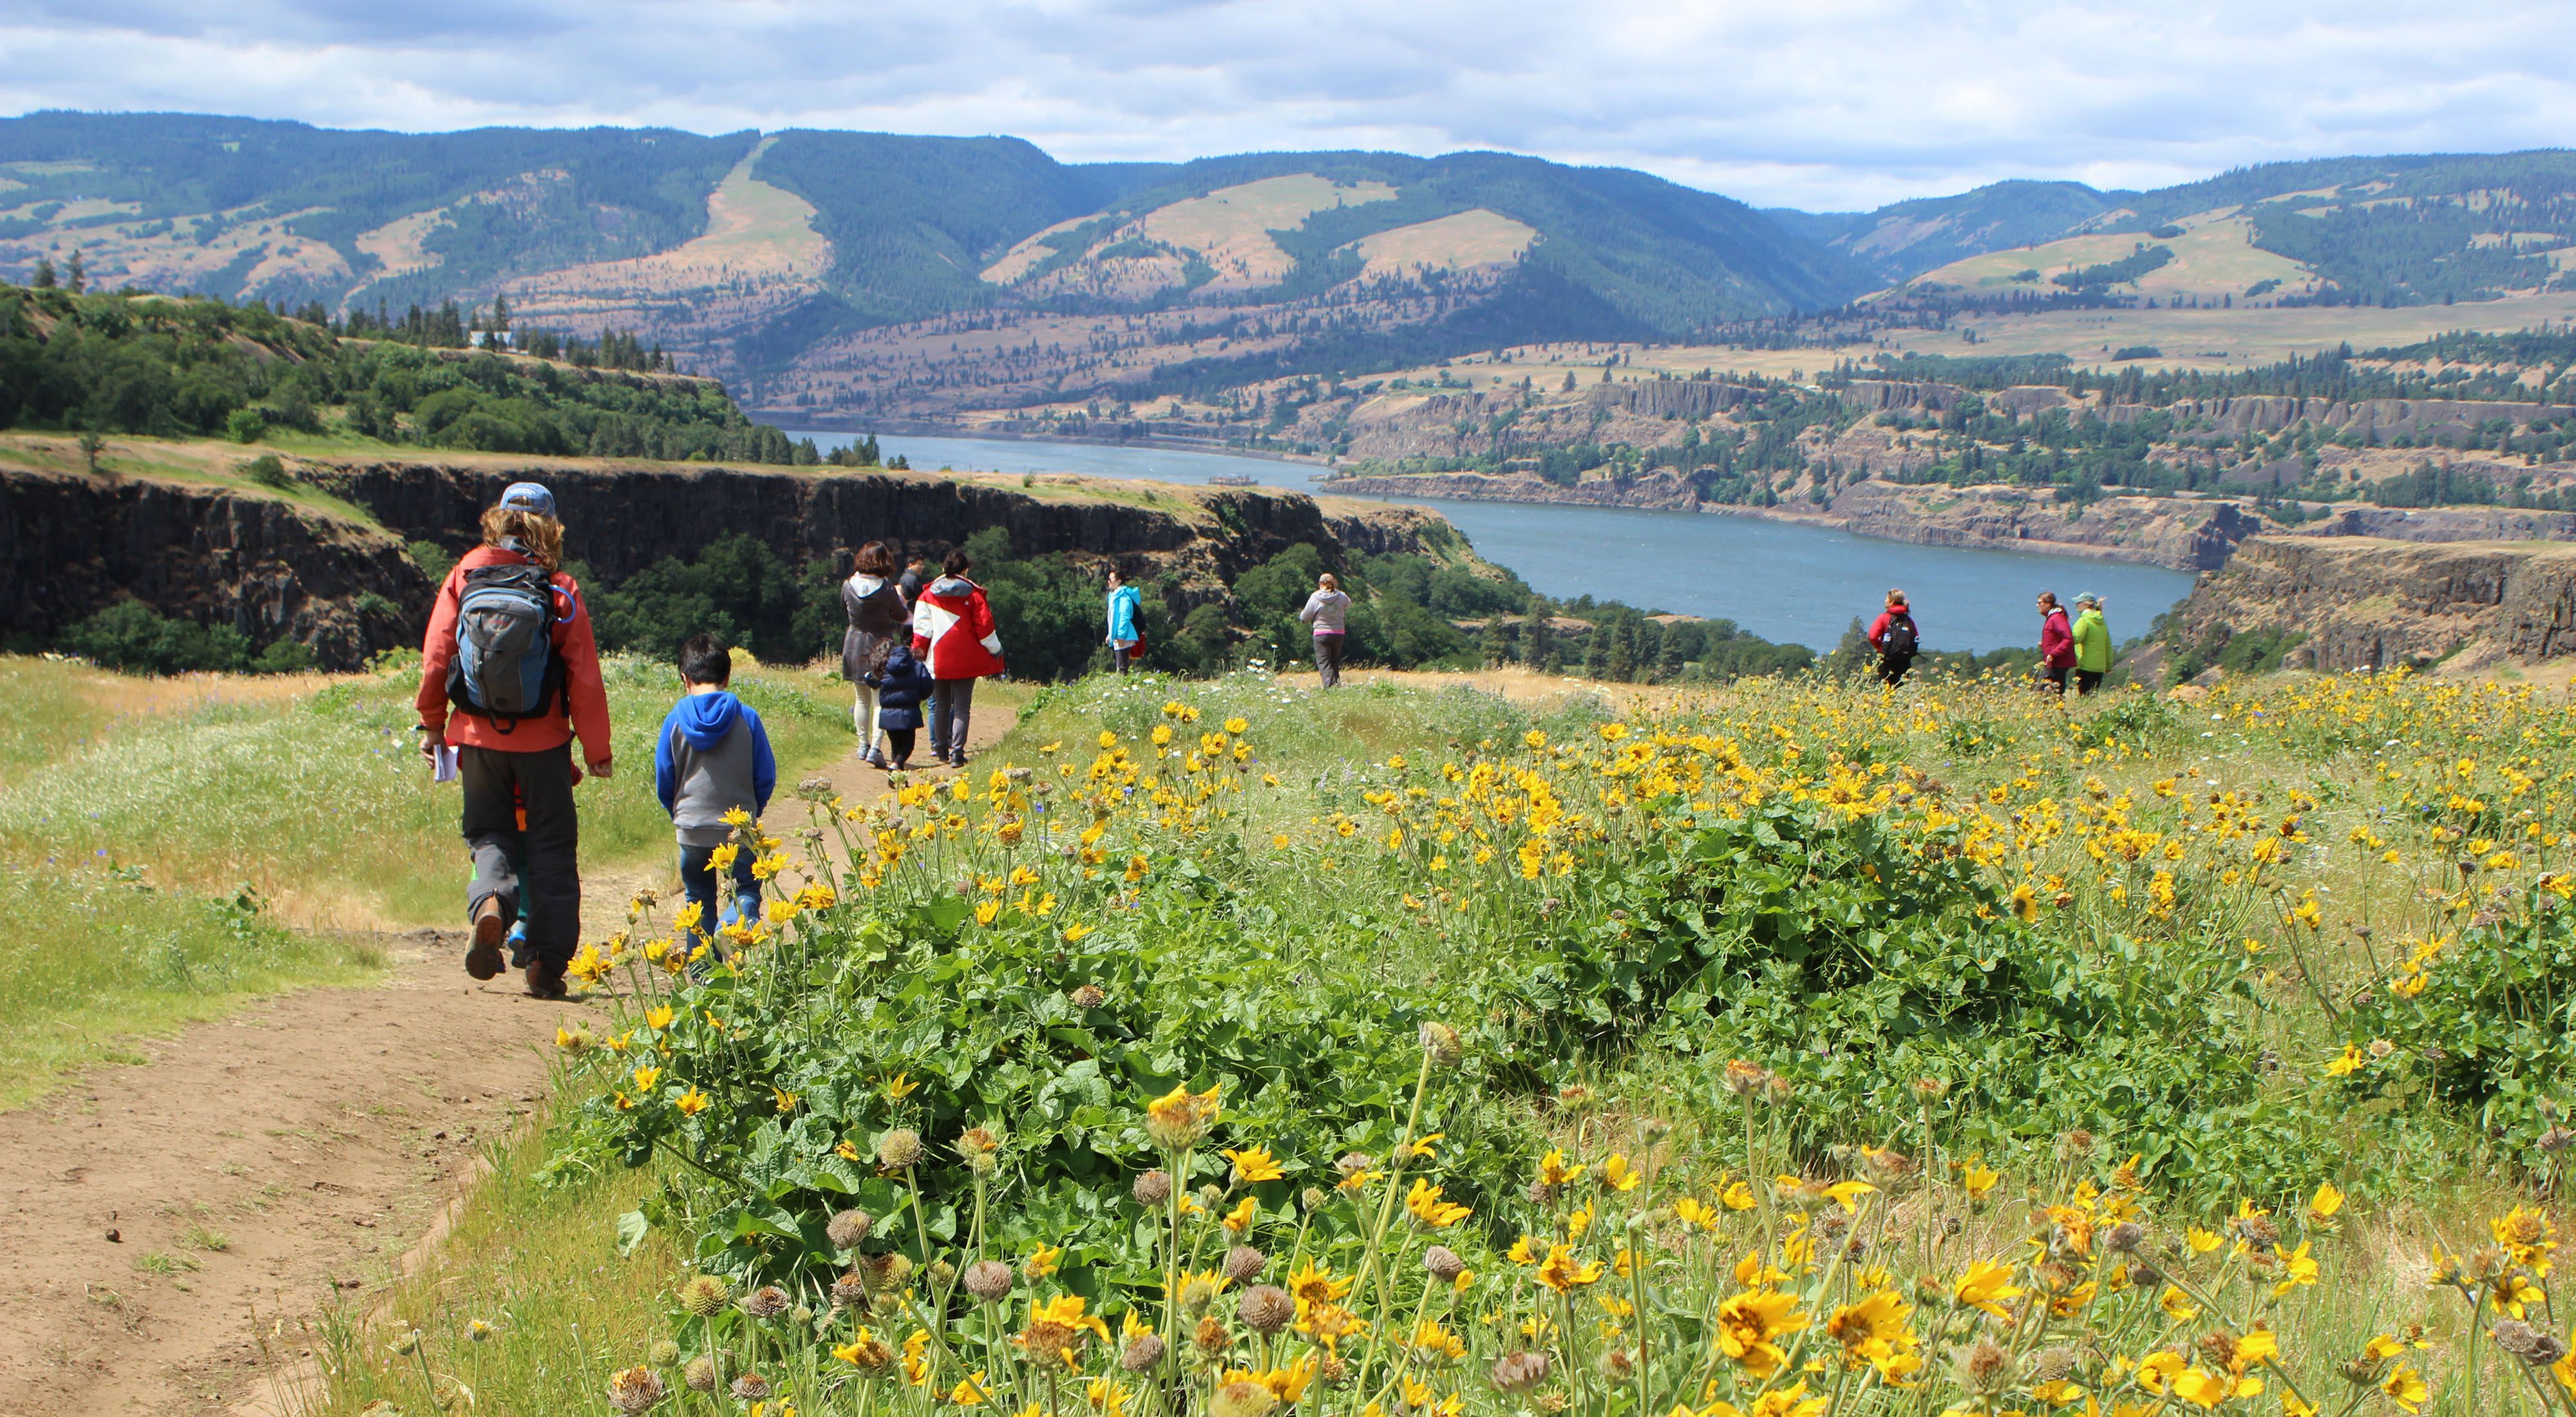 Hikers explore Tom McCall Preserve at Rowena Crest in the Columbia River Gorge, Oregon.